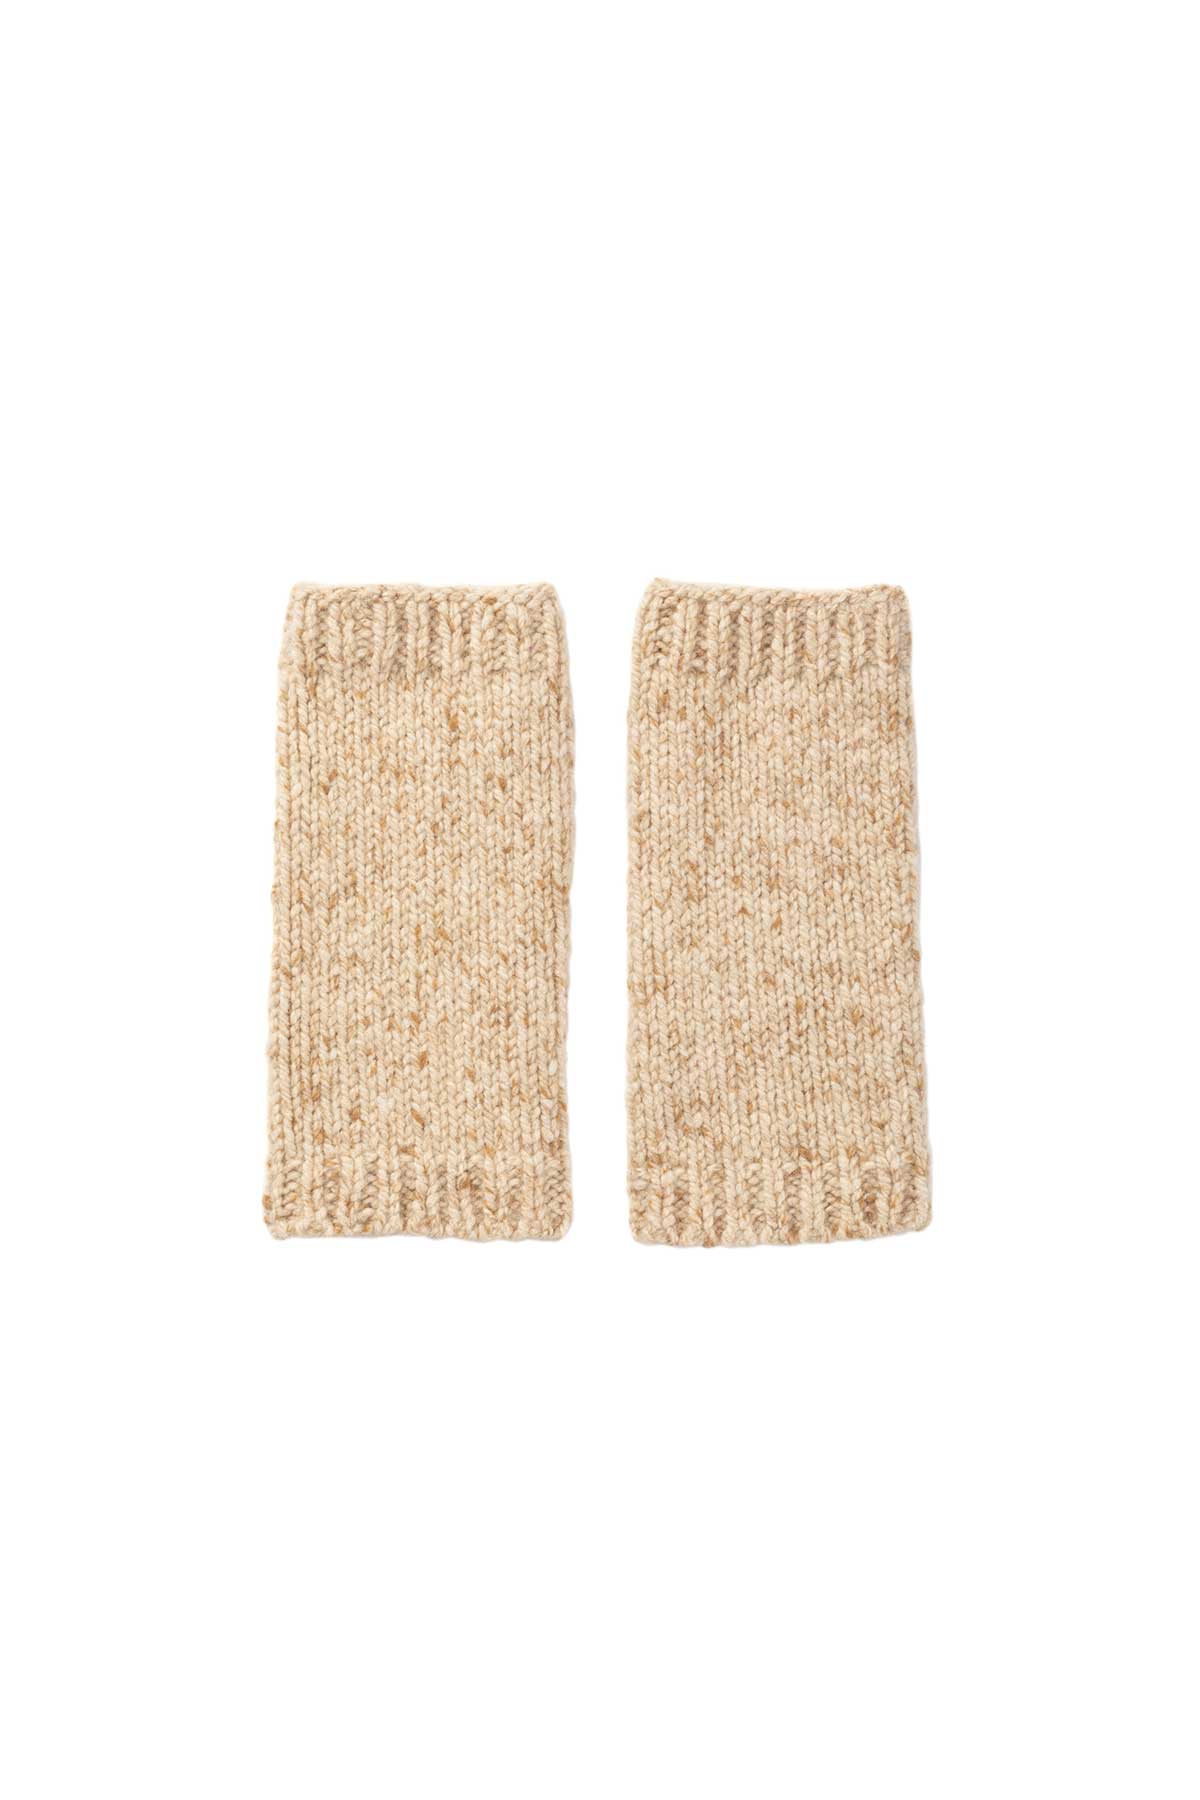 Johnstons of Elgin Donegal Cashmere Wrist Warmers in Light Camel on a white background HAC03255HB0209ONE